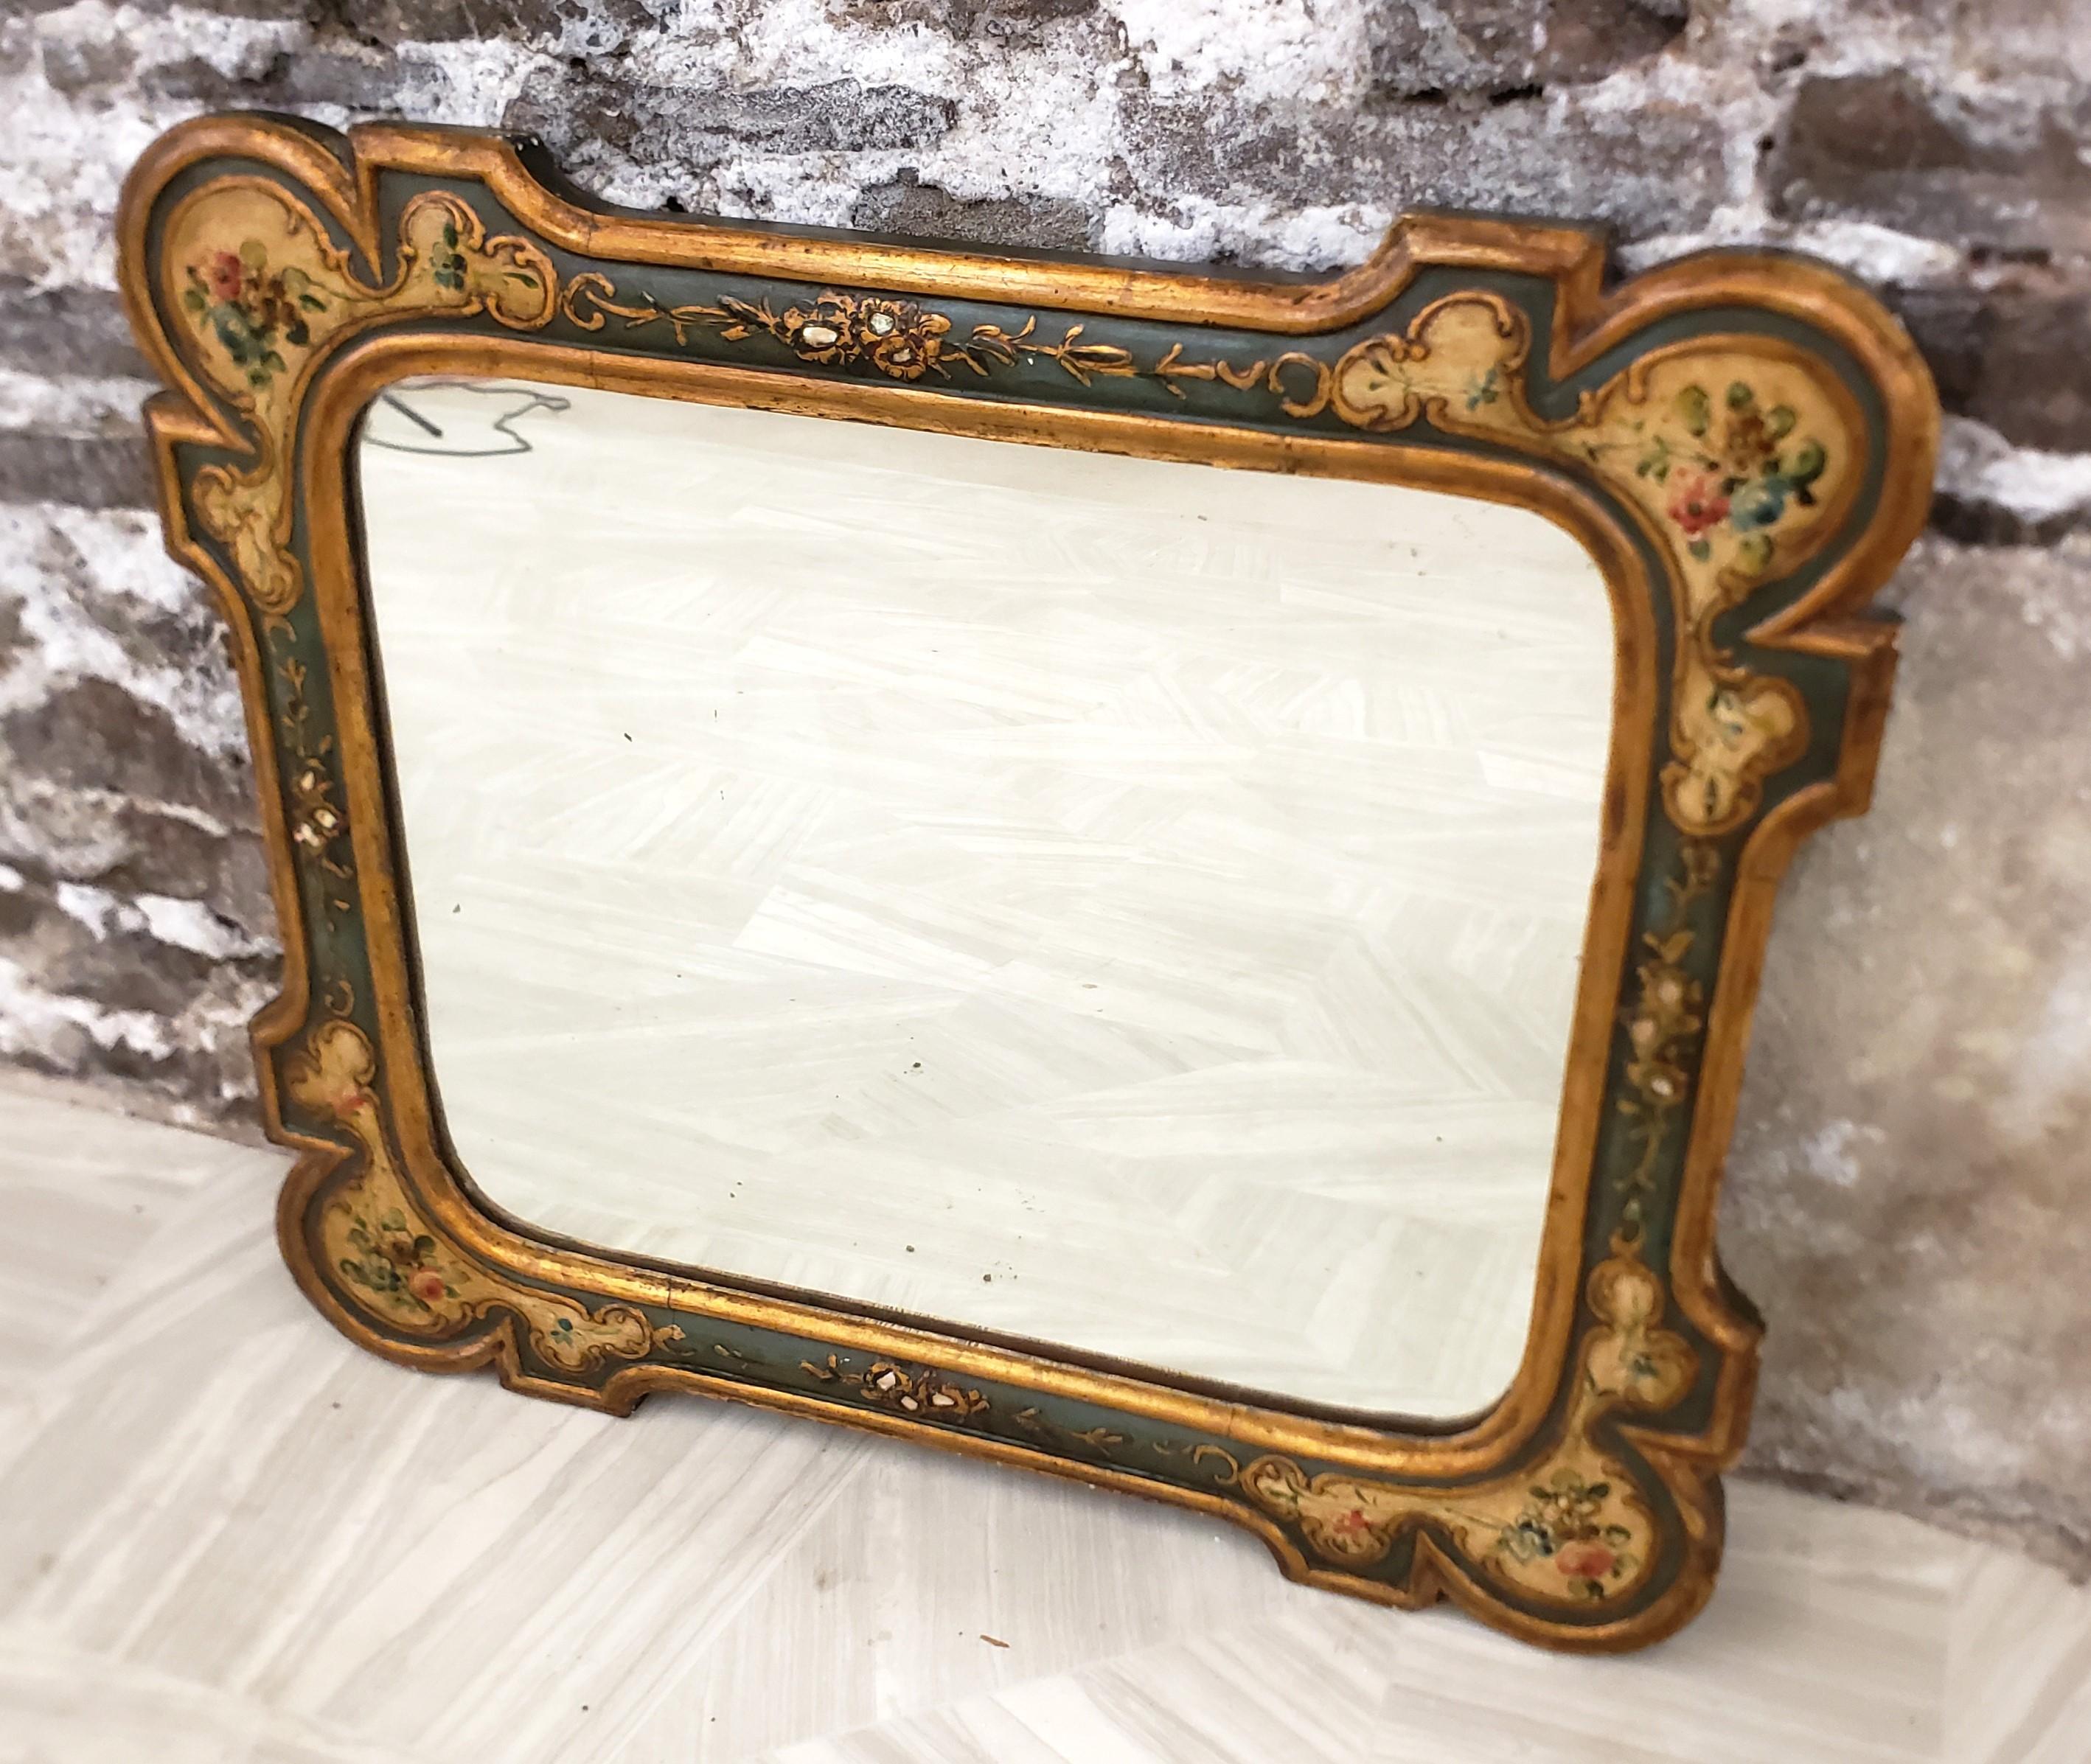 Antique Italian Florentine Wood Framed Wall Mirror with Hand-Painted Flowers In Good Condition For Sale In Hamilton, Ontario